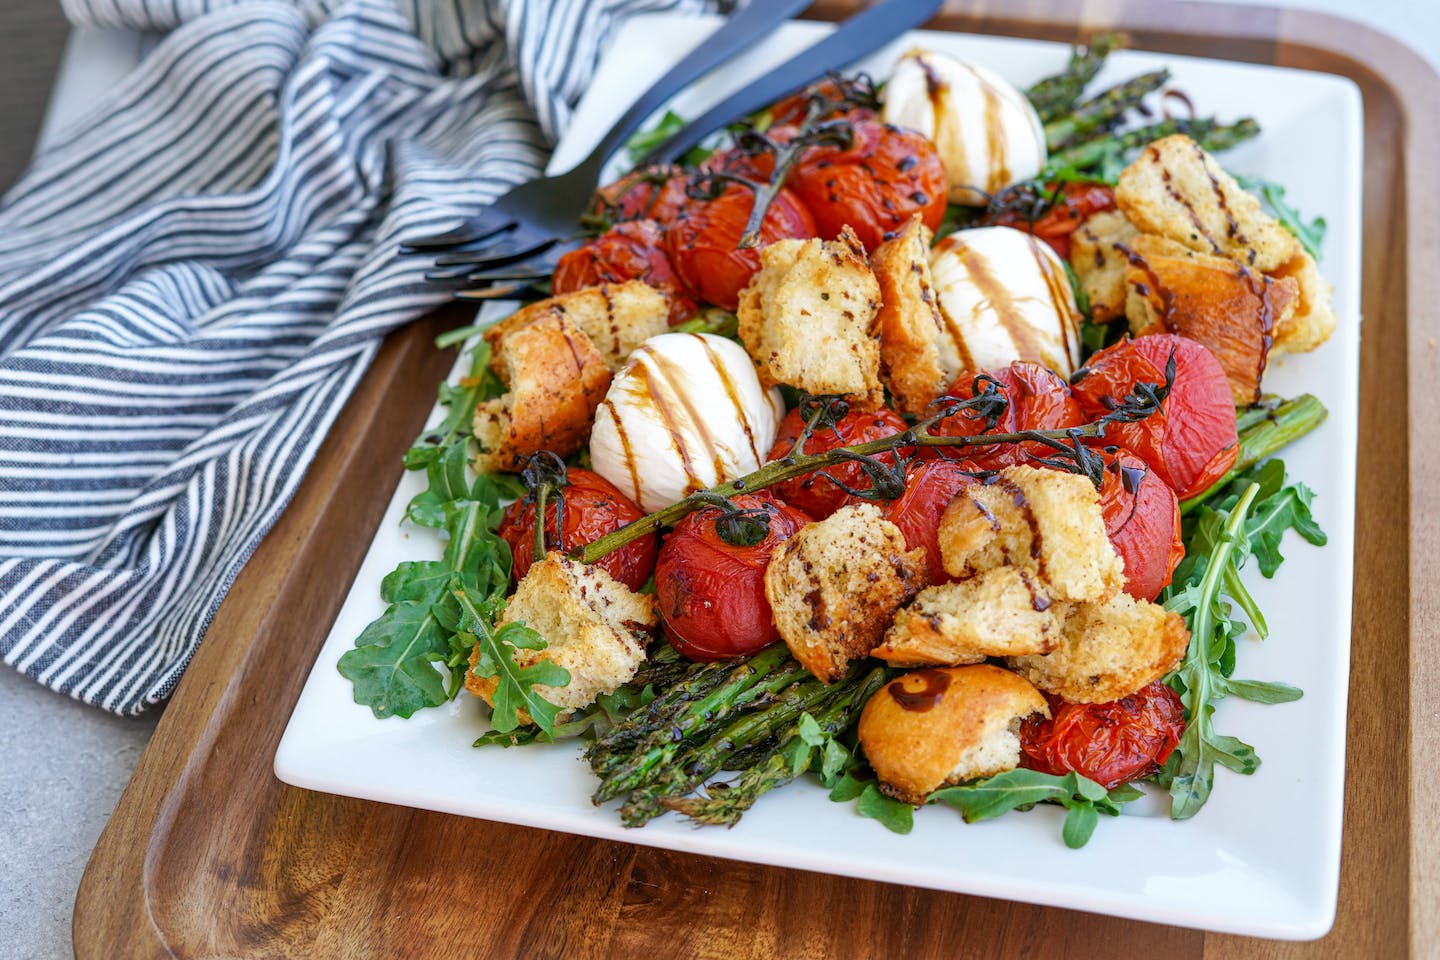 Grilled Burrata Salad with Ripped Croutons